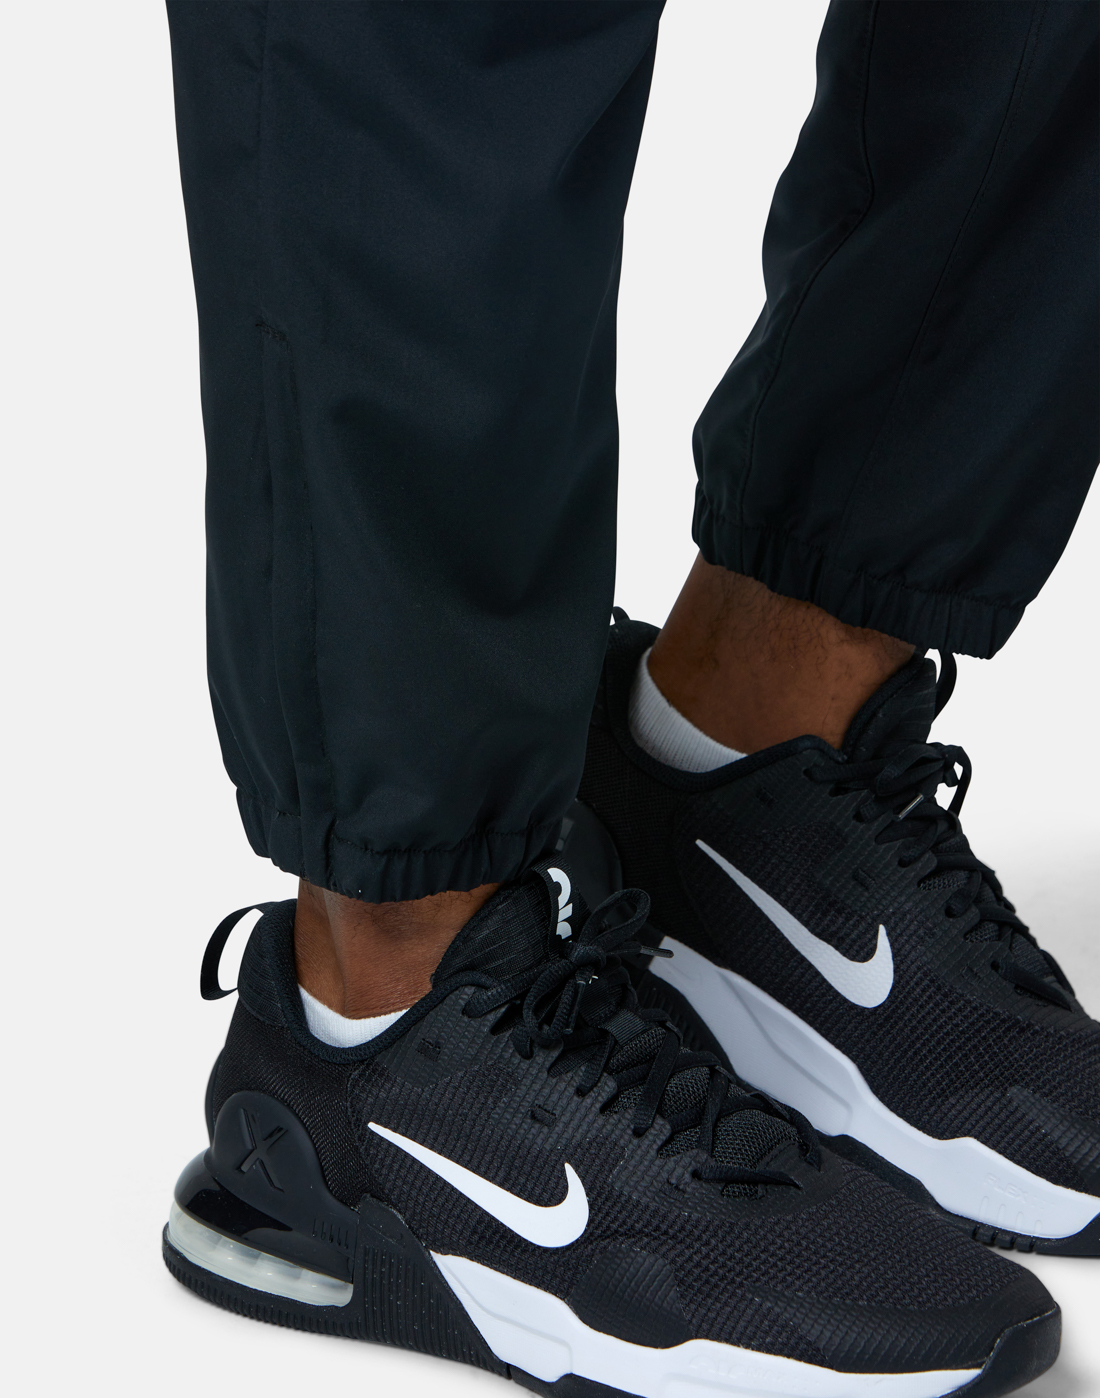 Nike Mens Form Train Woven Taper Pants - Black | Life Style Sports IE